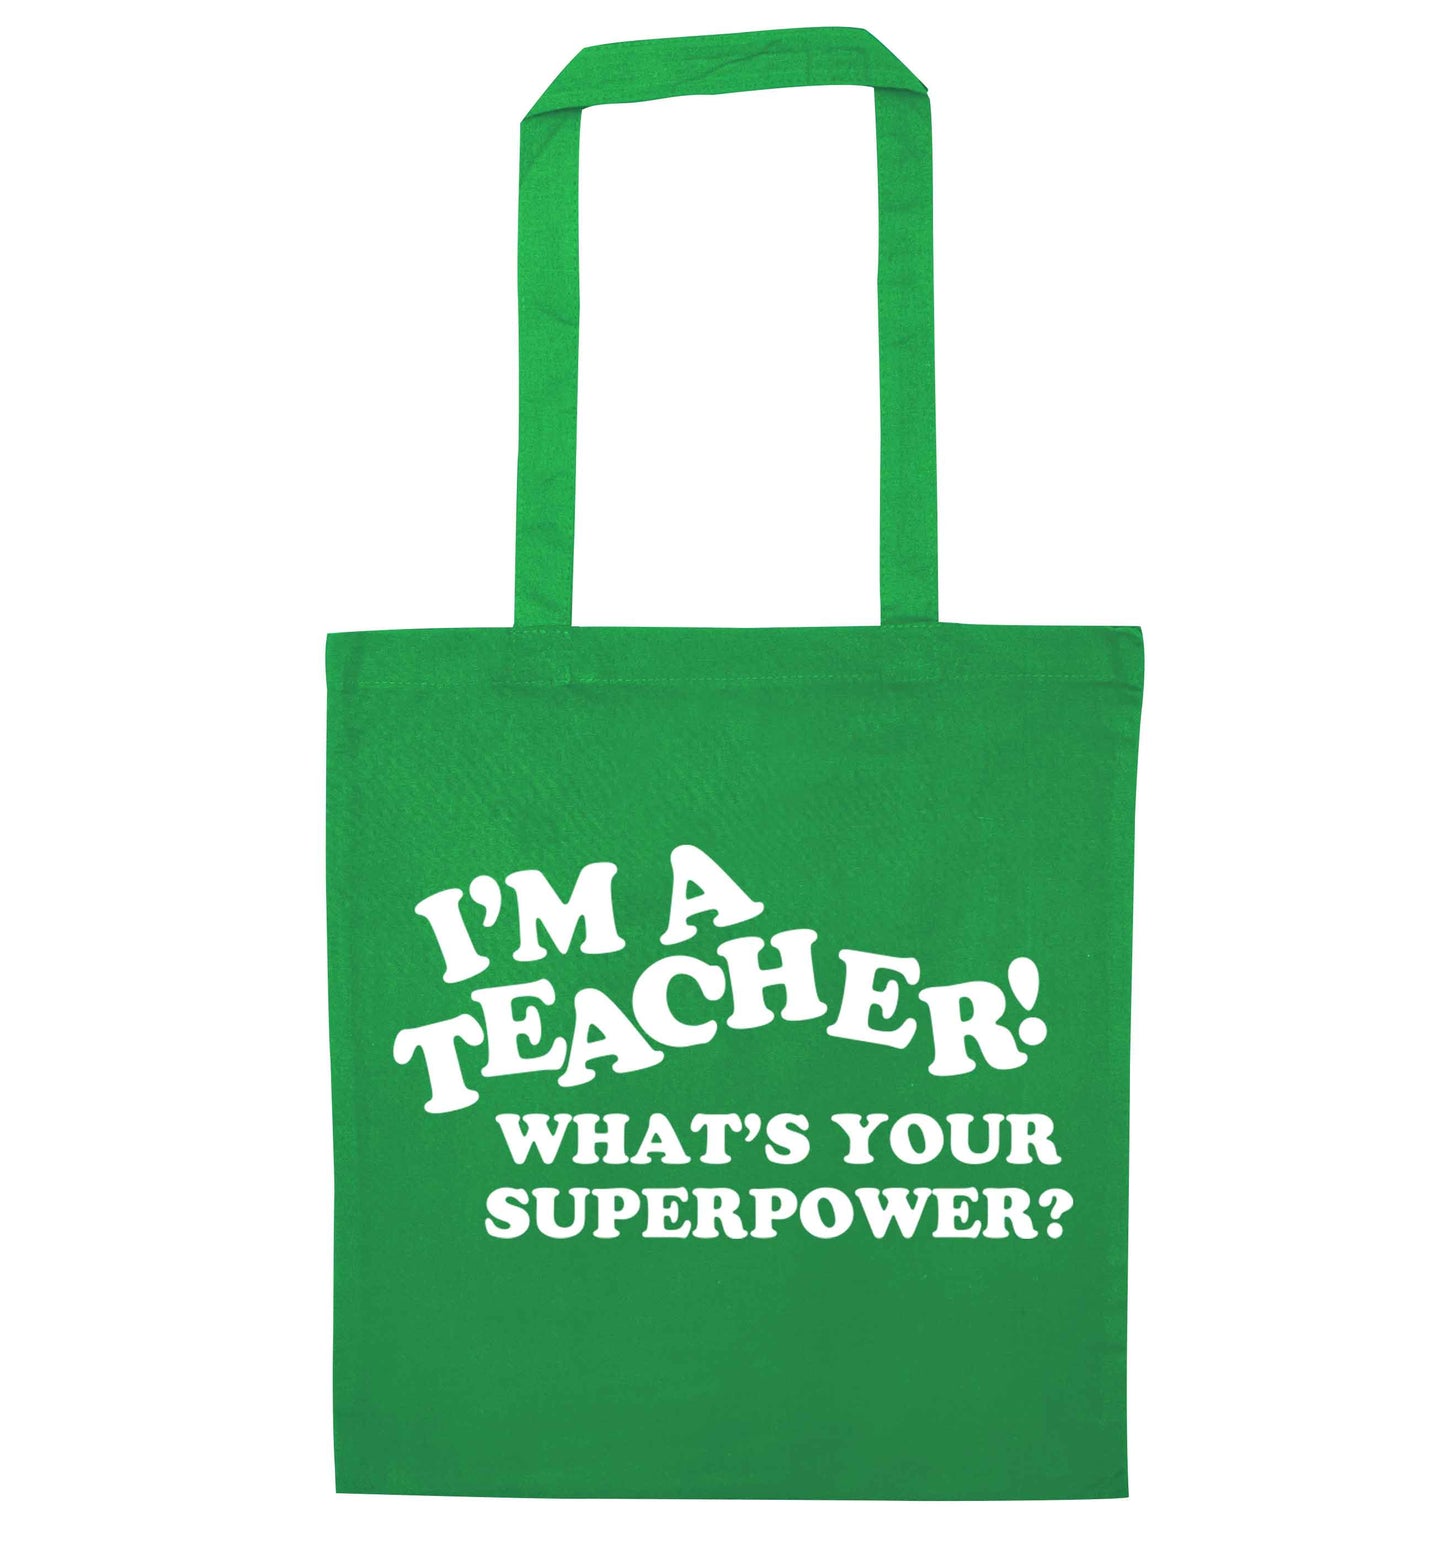 I'm a teacher what's your superpower?! green tote bag